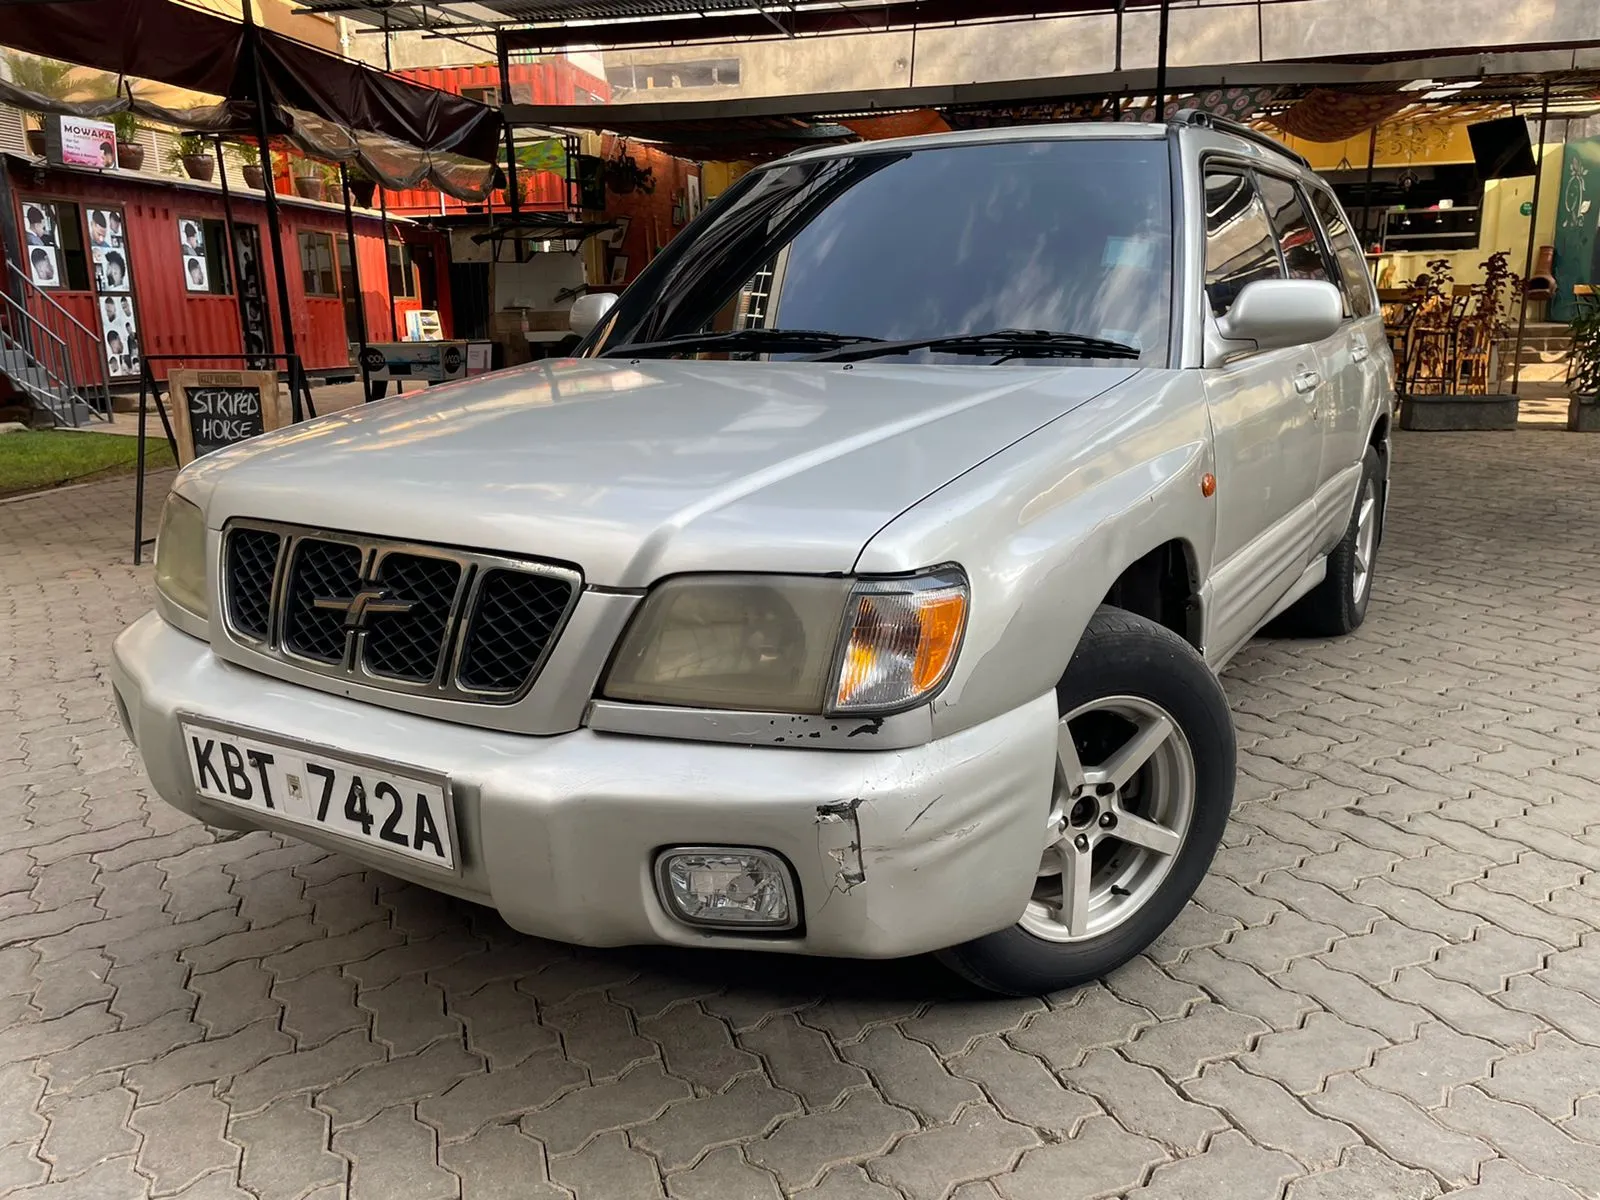 Cars Cars For Sale/Vehicles-Subaru Forester KBT 580k ONLY You Pay 20% Deposit 11